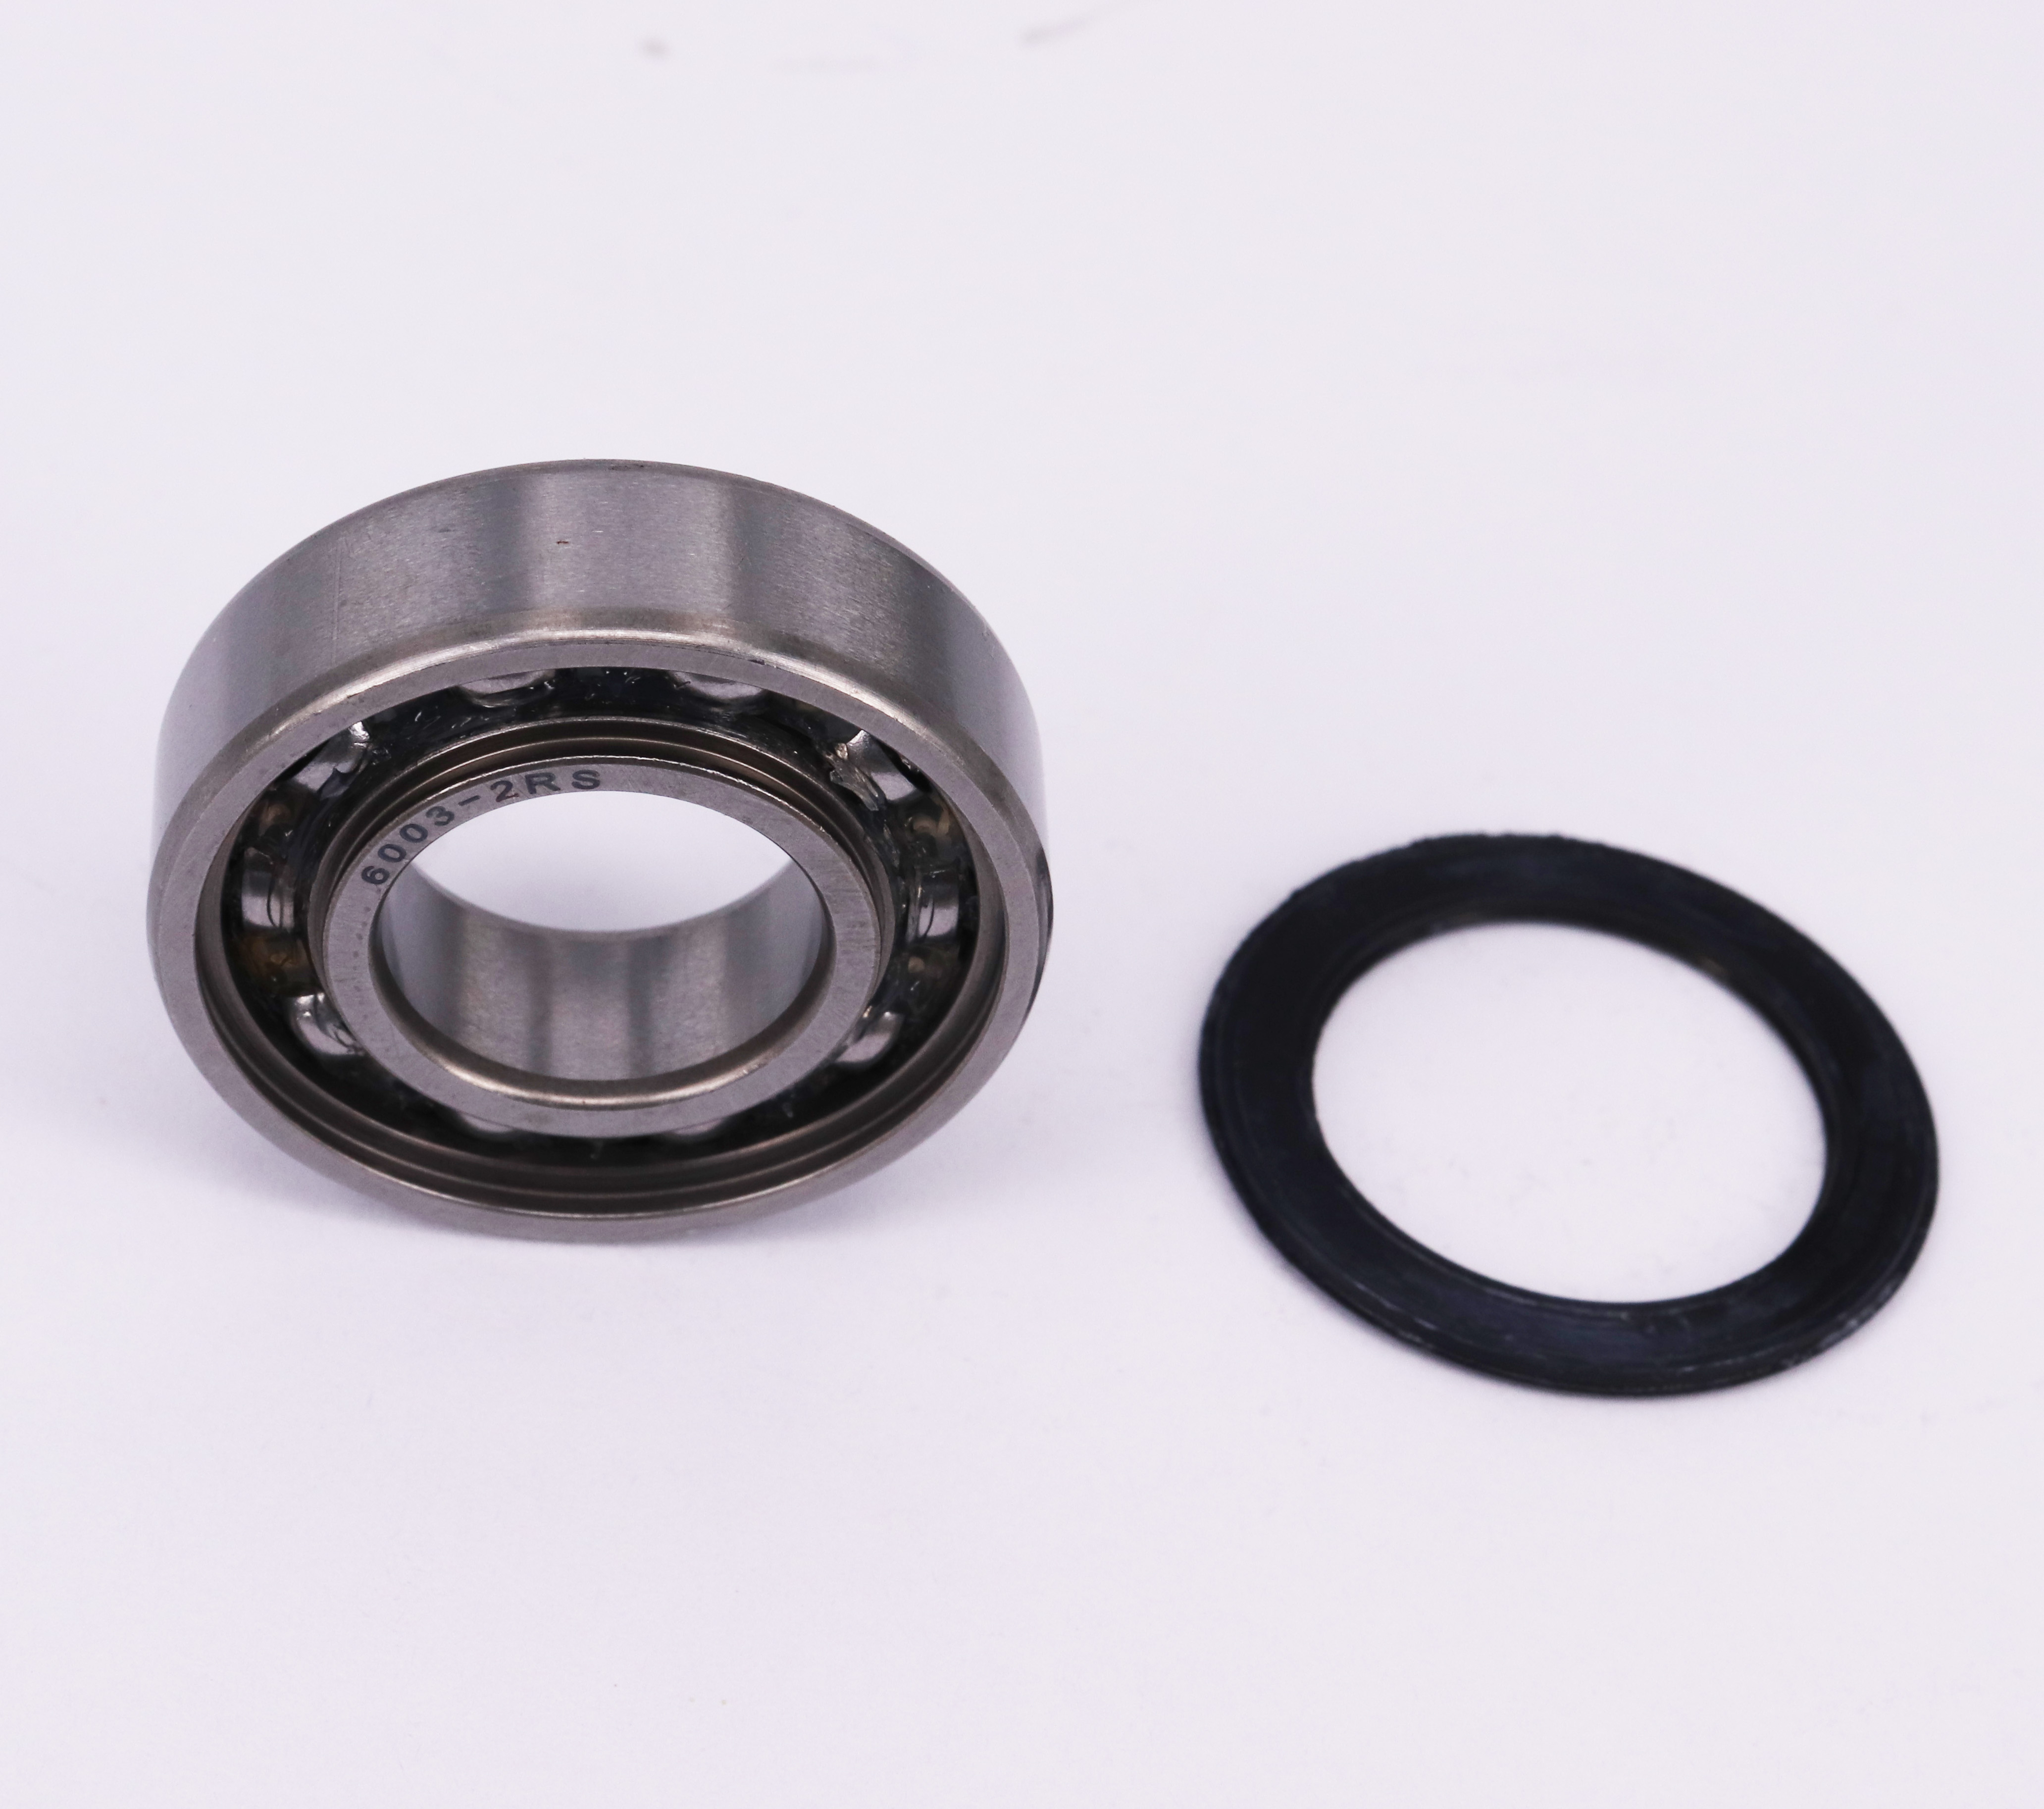 A single carton plastic drum Gcr15  Deep Groove Ball Bearings 6003 Open Z2V2 P6 ABEC3 For machine